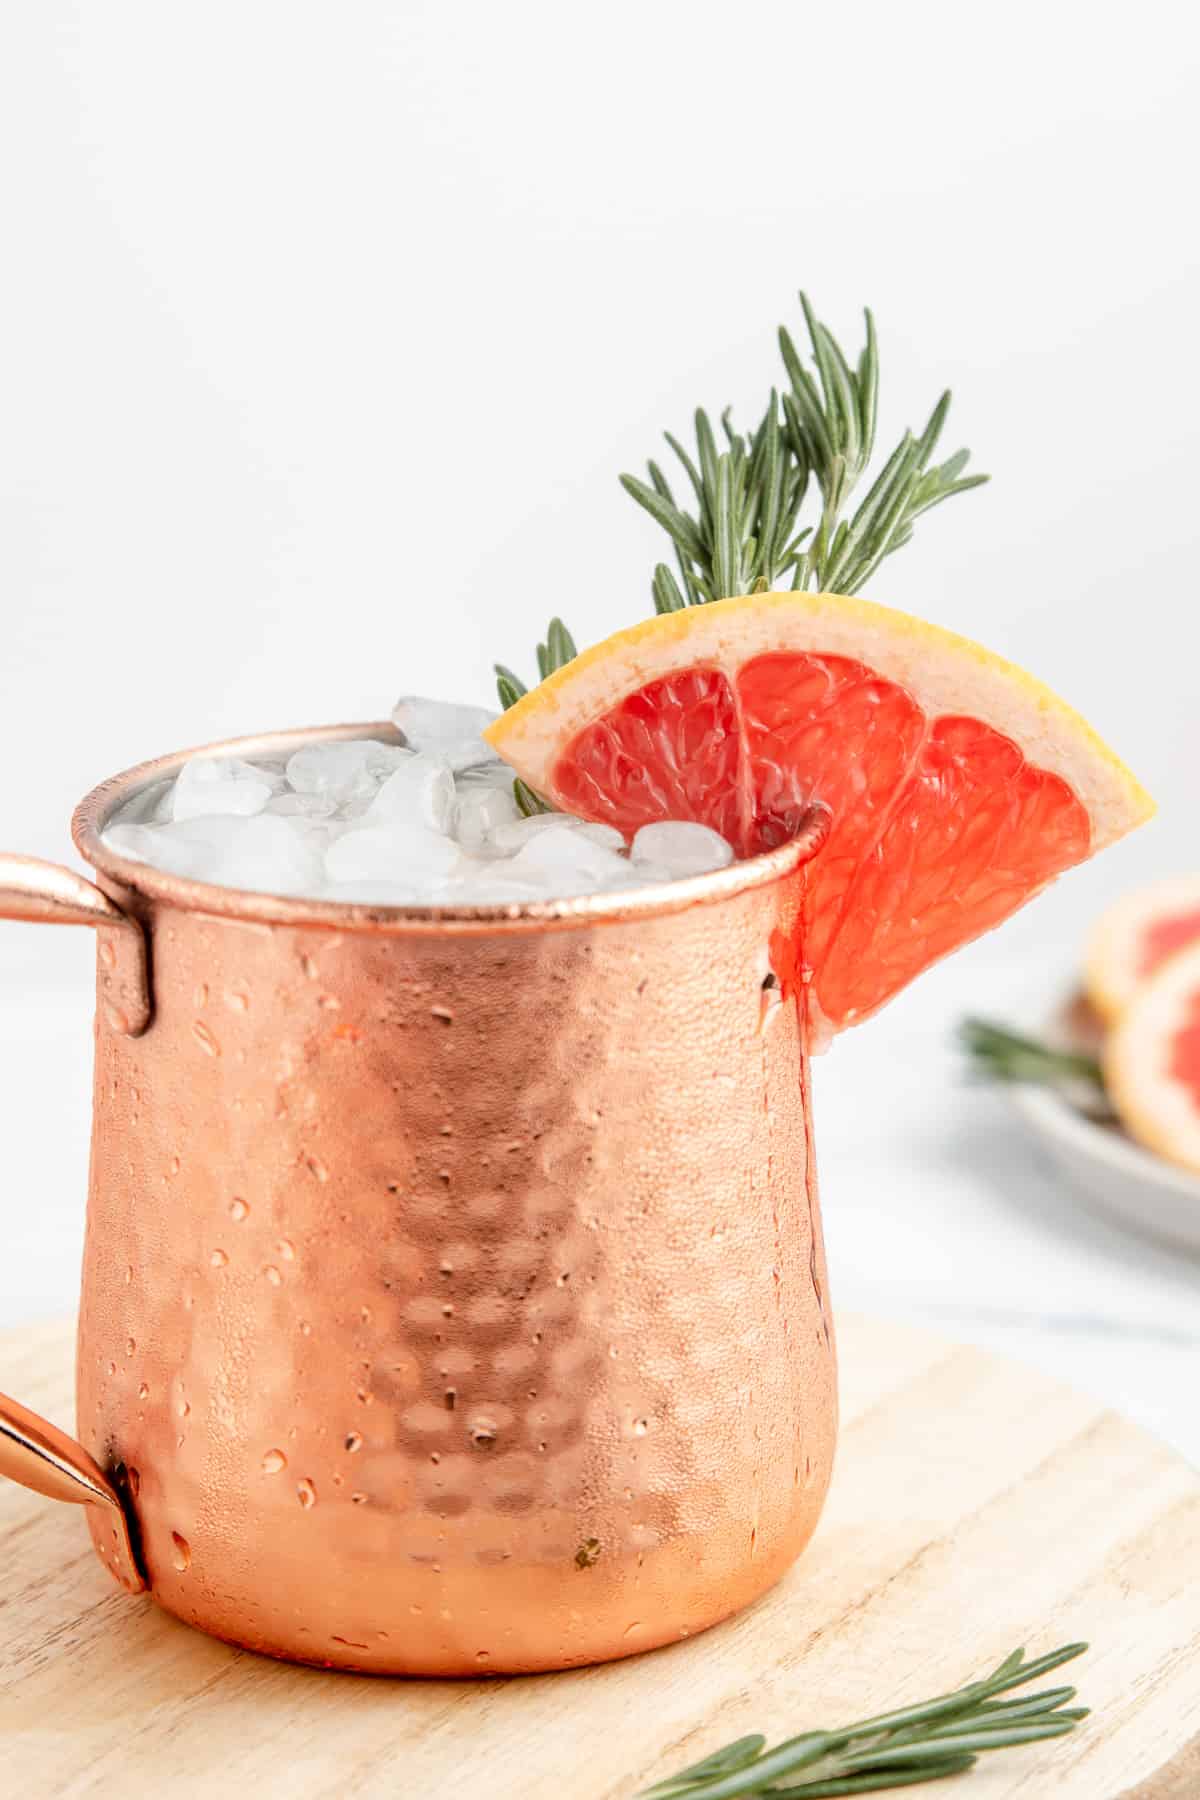 A copper mug full of Moscow mule with a grapefruit wedge and fresh rosemary sprig.